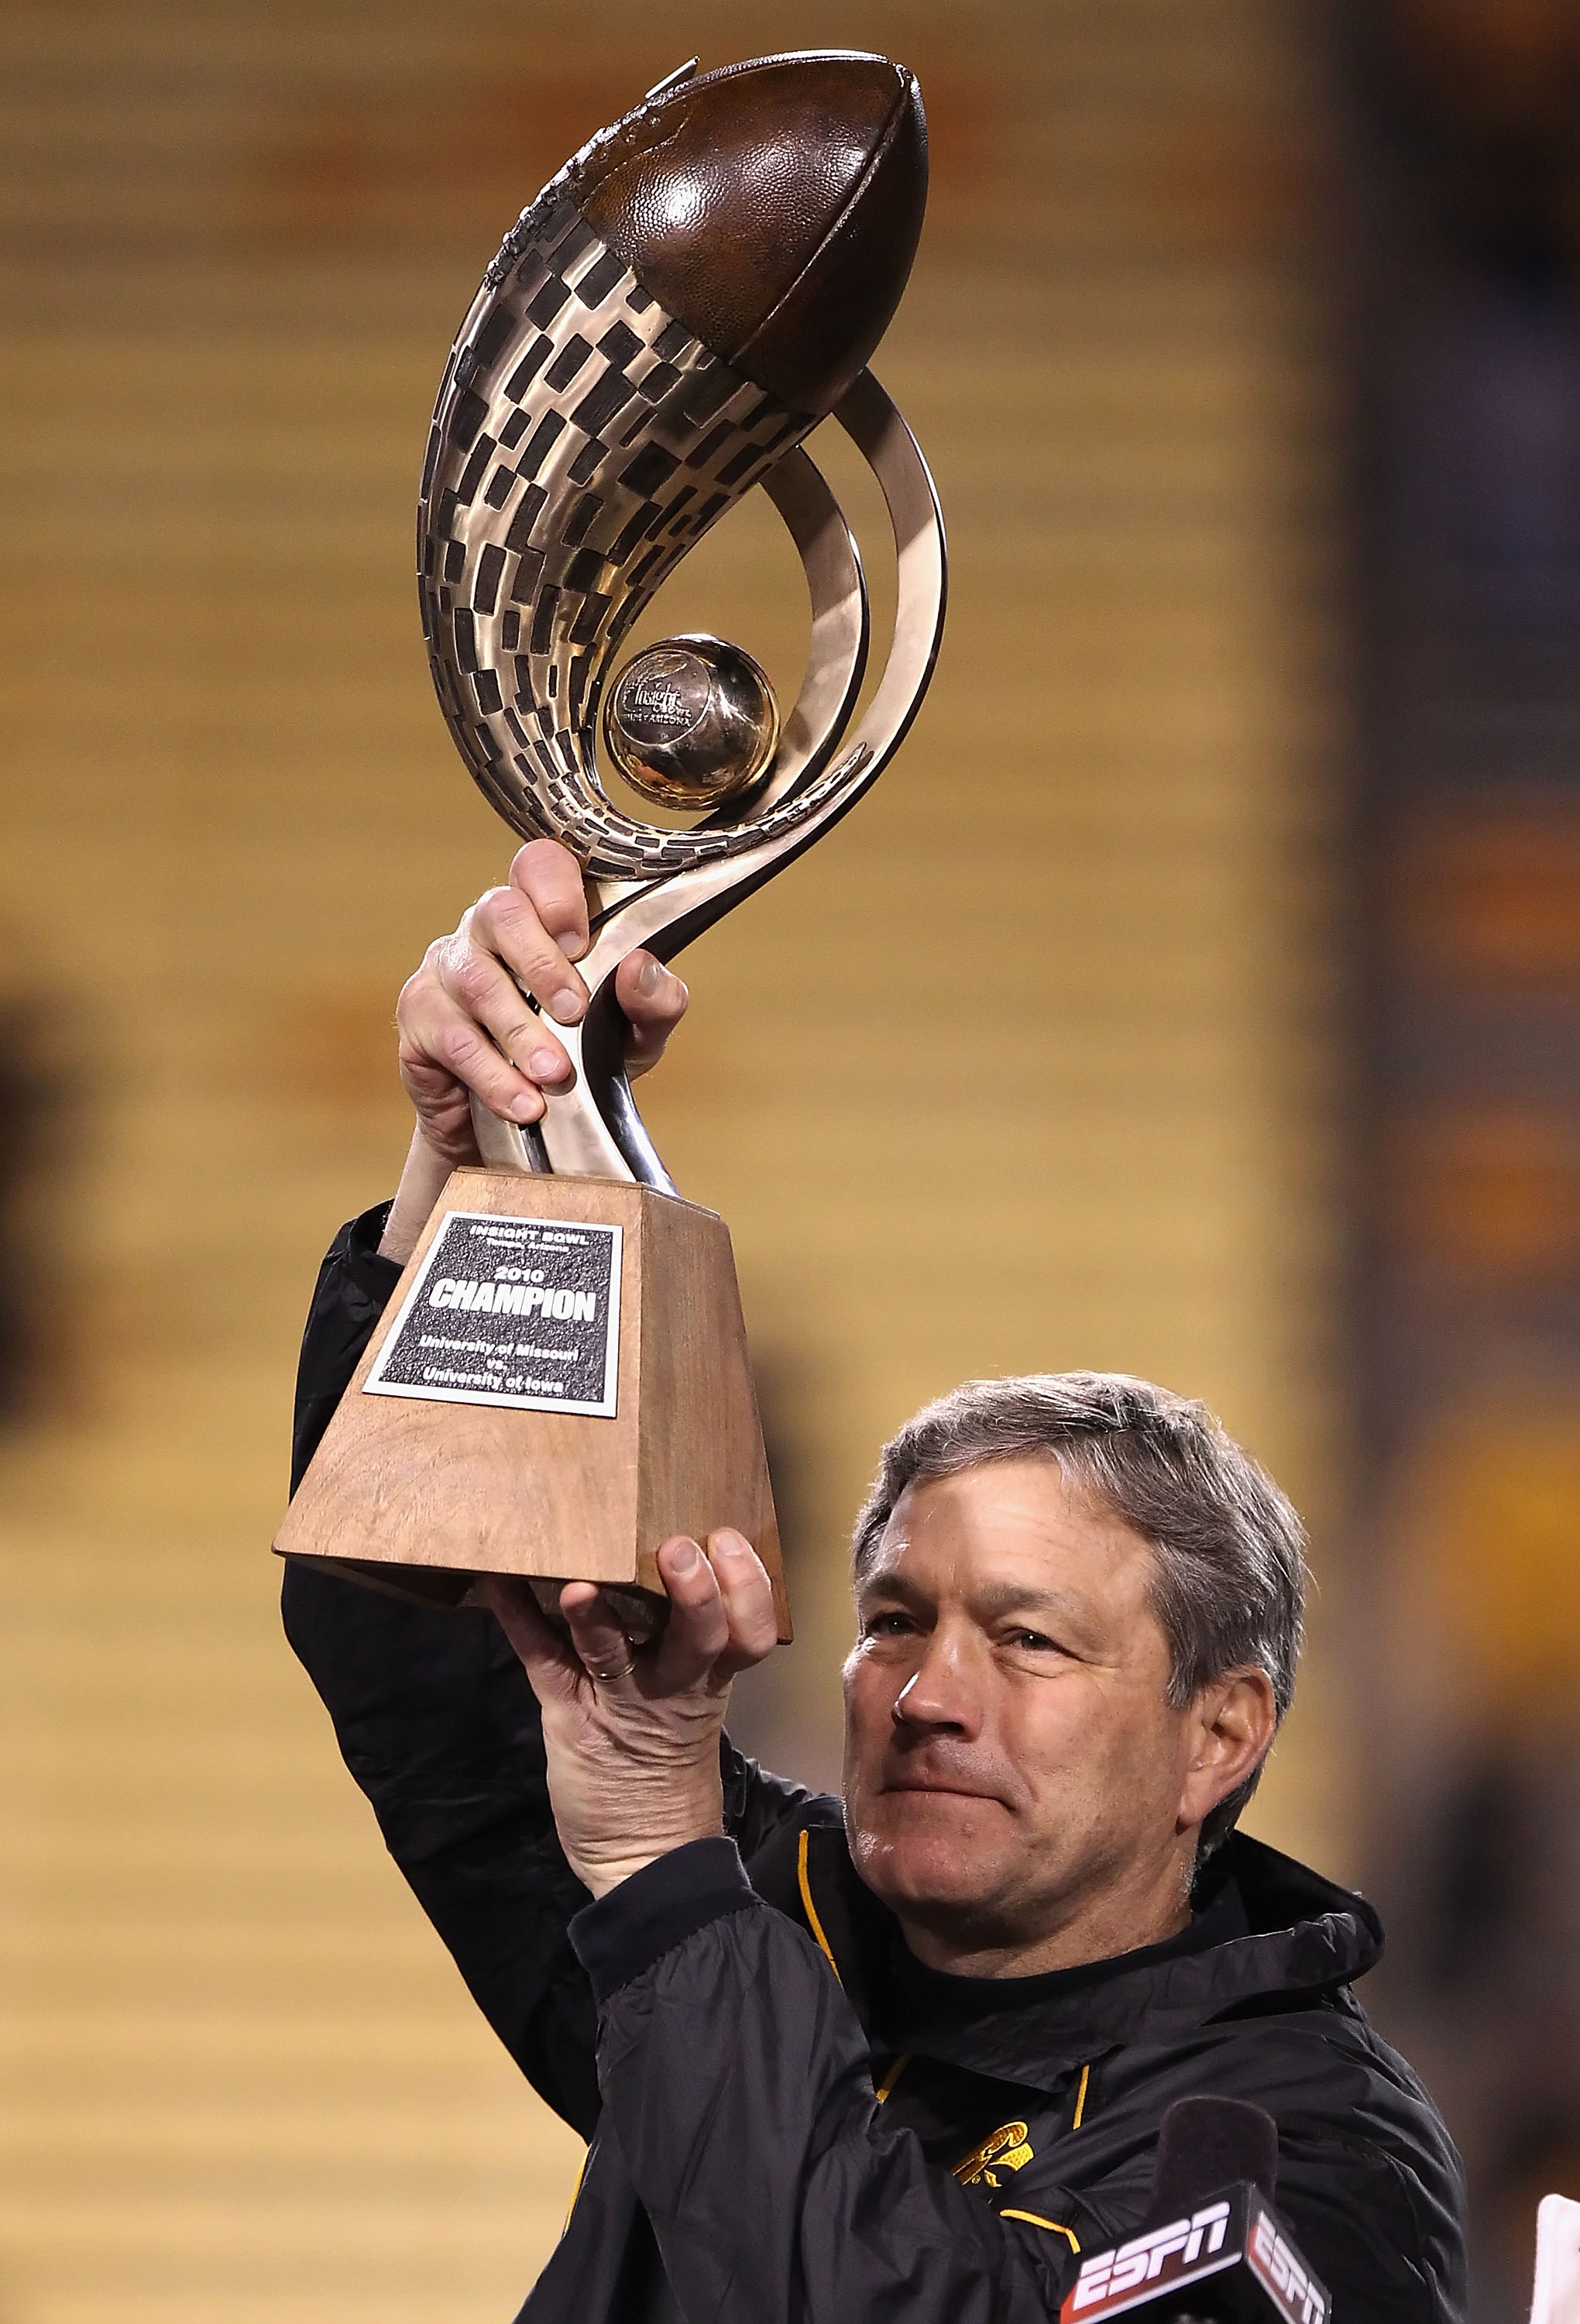 TEMPE, AZ - DECEMBER 28:  Head coach Kirk Ferentz of the Iowa Hawkeyes celebrates with the  Insight Bowl trophy after defeating the Missouri Tigers at Sun Devil Stadium on December 28, 2010 in Tempe, Arizona.  The Hawkeyes defeated the Tigers 27-24.  (Pho